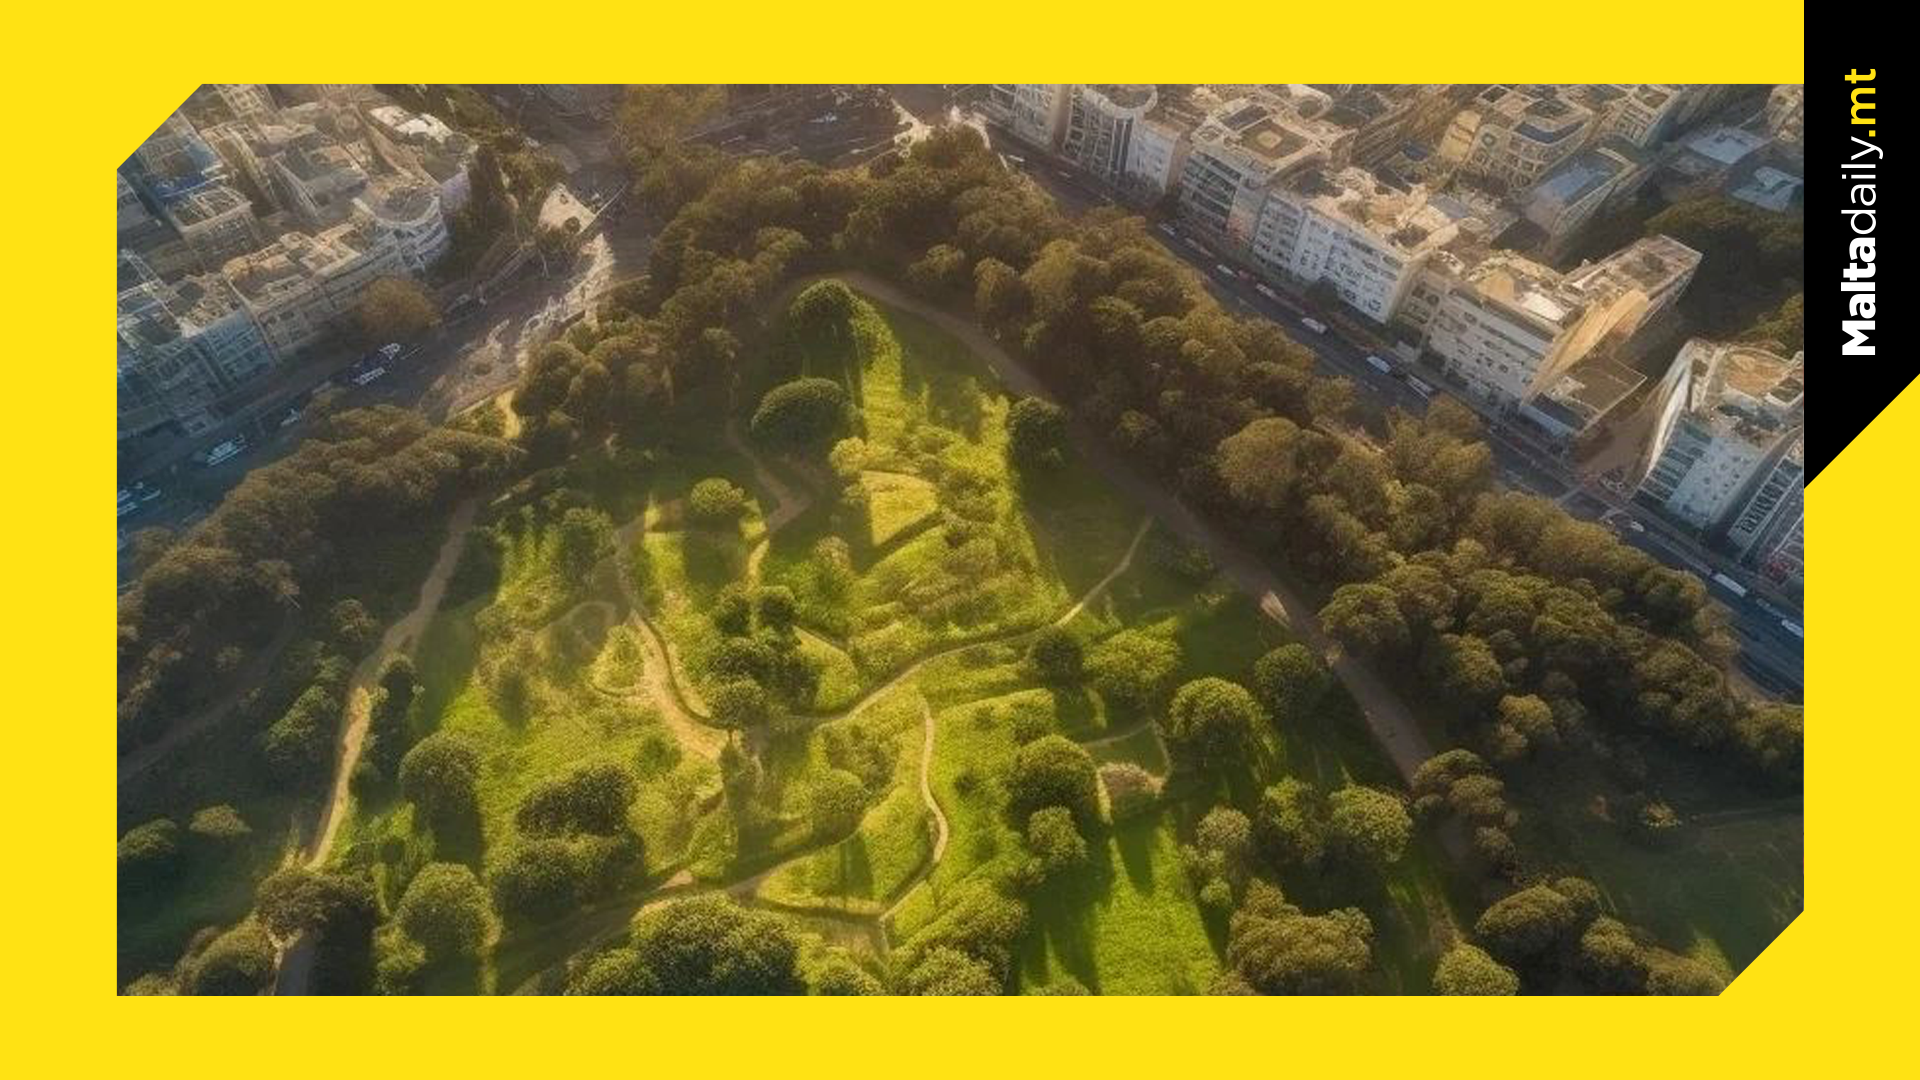 Local AI creator shows what a central park in Malta would look like